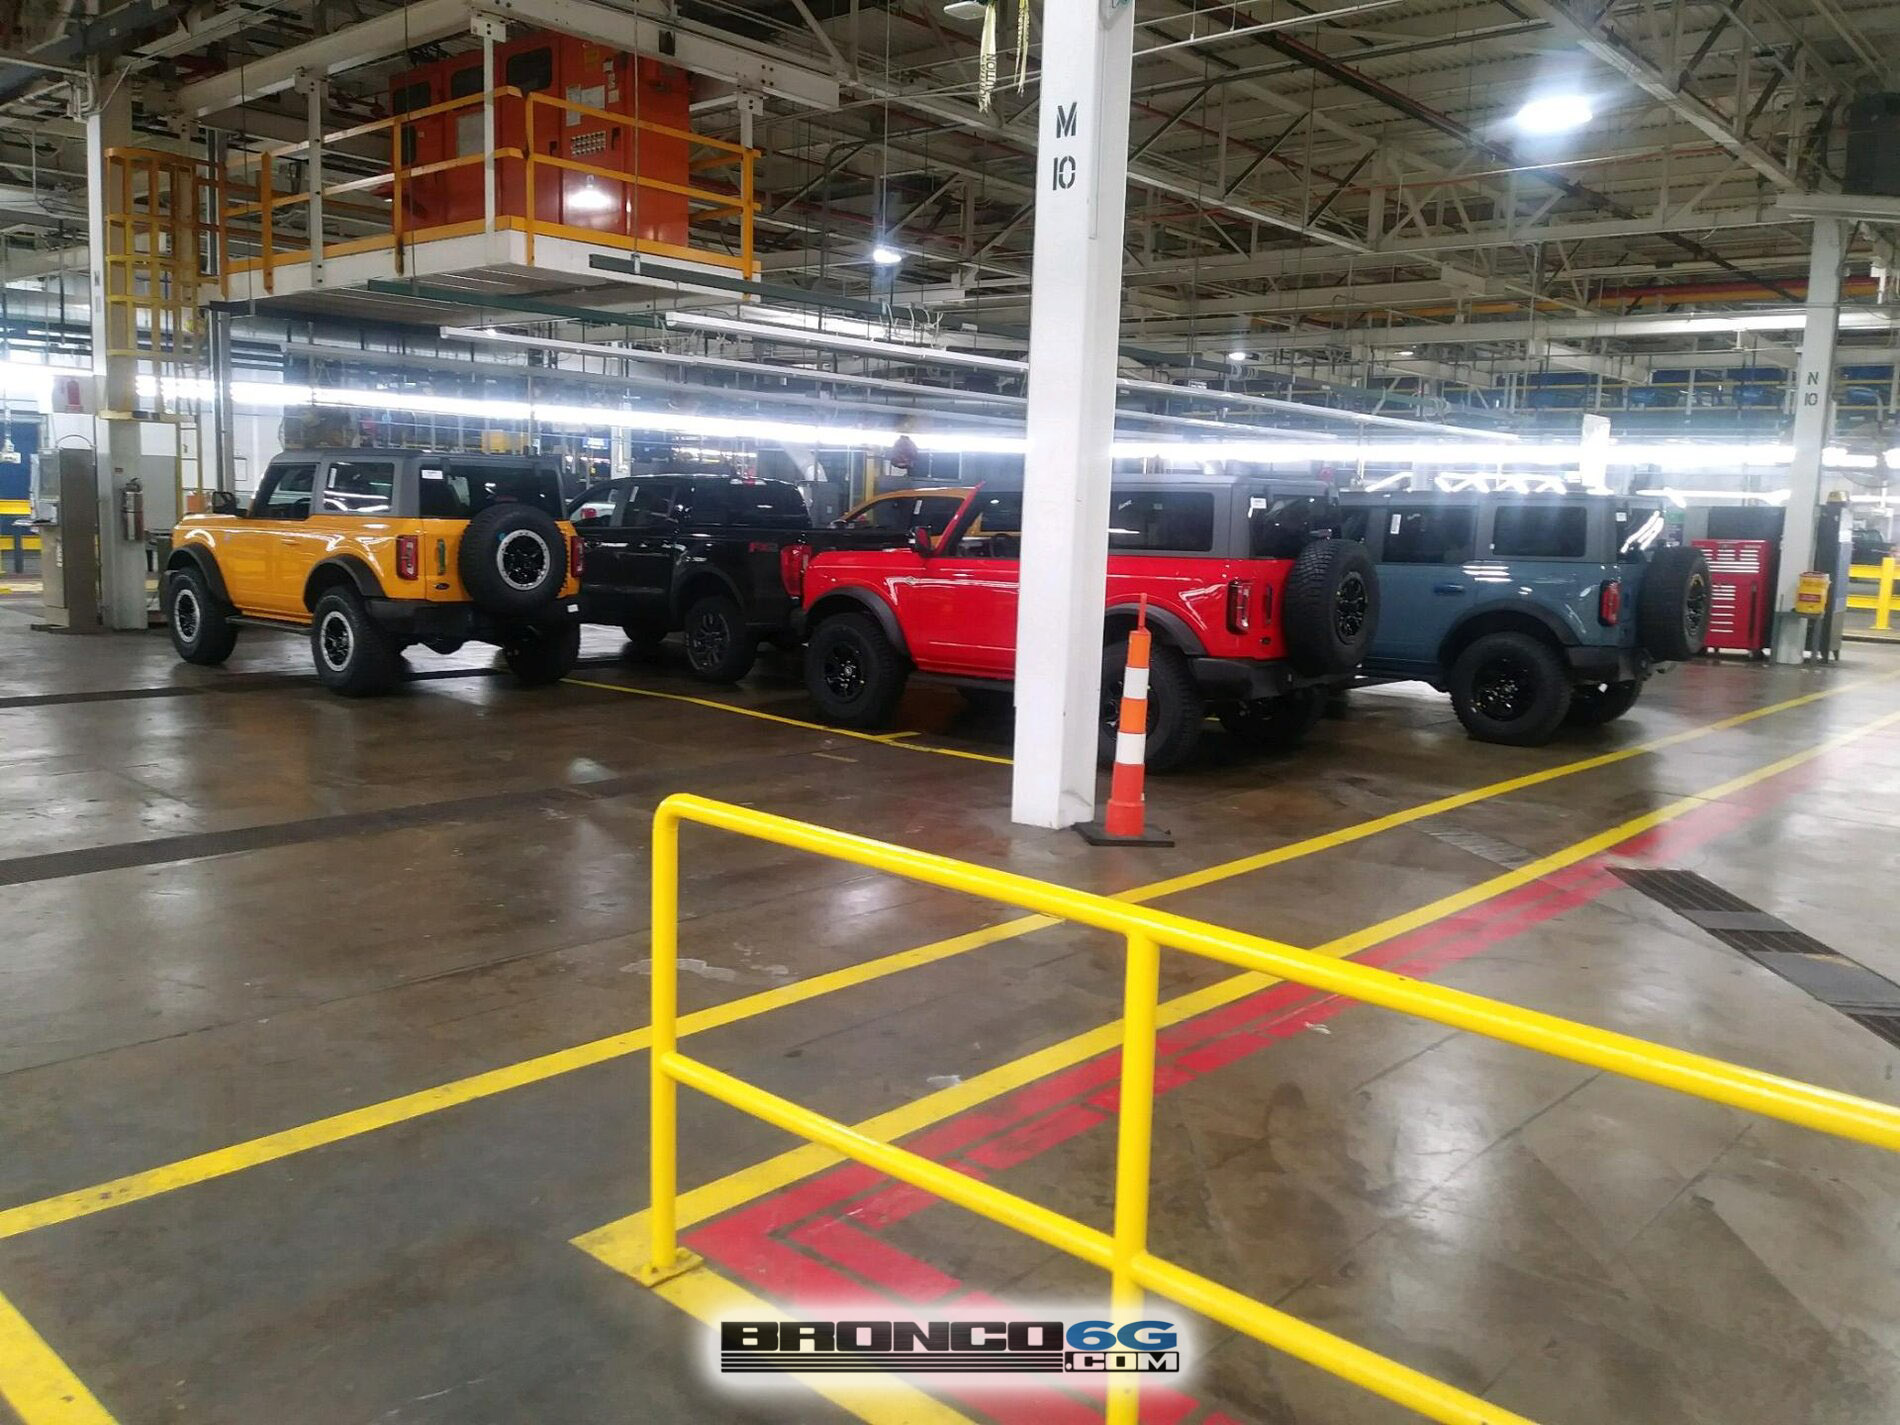 Ford Bronco 30+ Bronco Factory Pics: Navy Pier Interior, Bronze Dashboard, Base Antimatter Blue + More by The Stig ??️? 2021 Ford Bronco Production Factory Exterior Interior 6